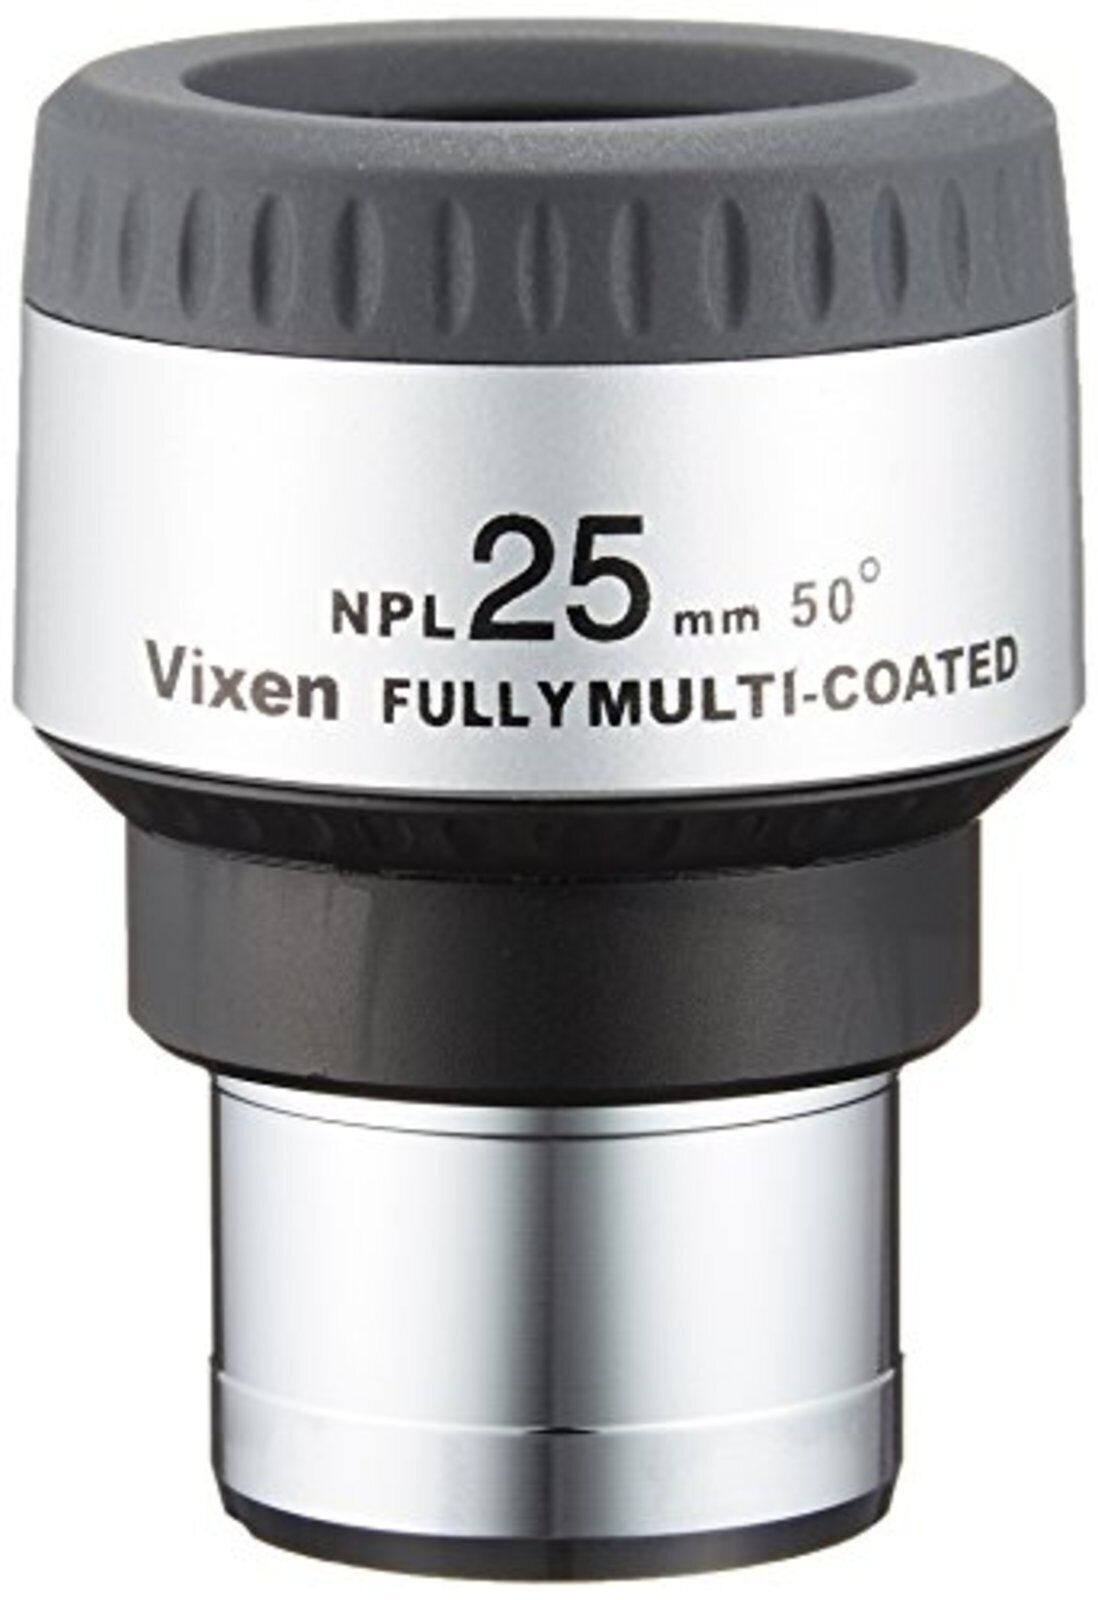 Vixen NPL25mm 39207-0 Eyepiece for astronomical  w/Tracking# New Japan